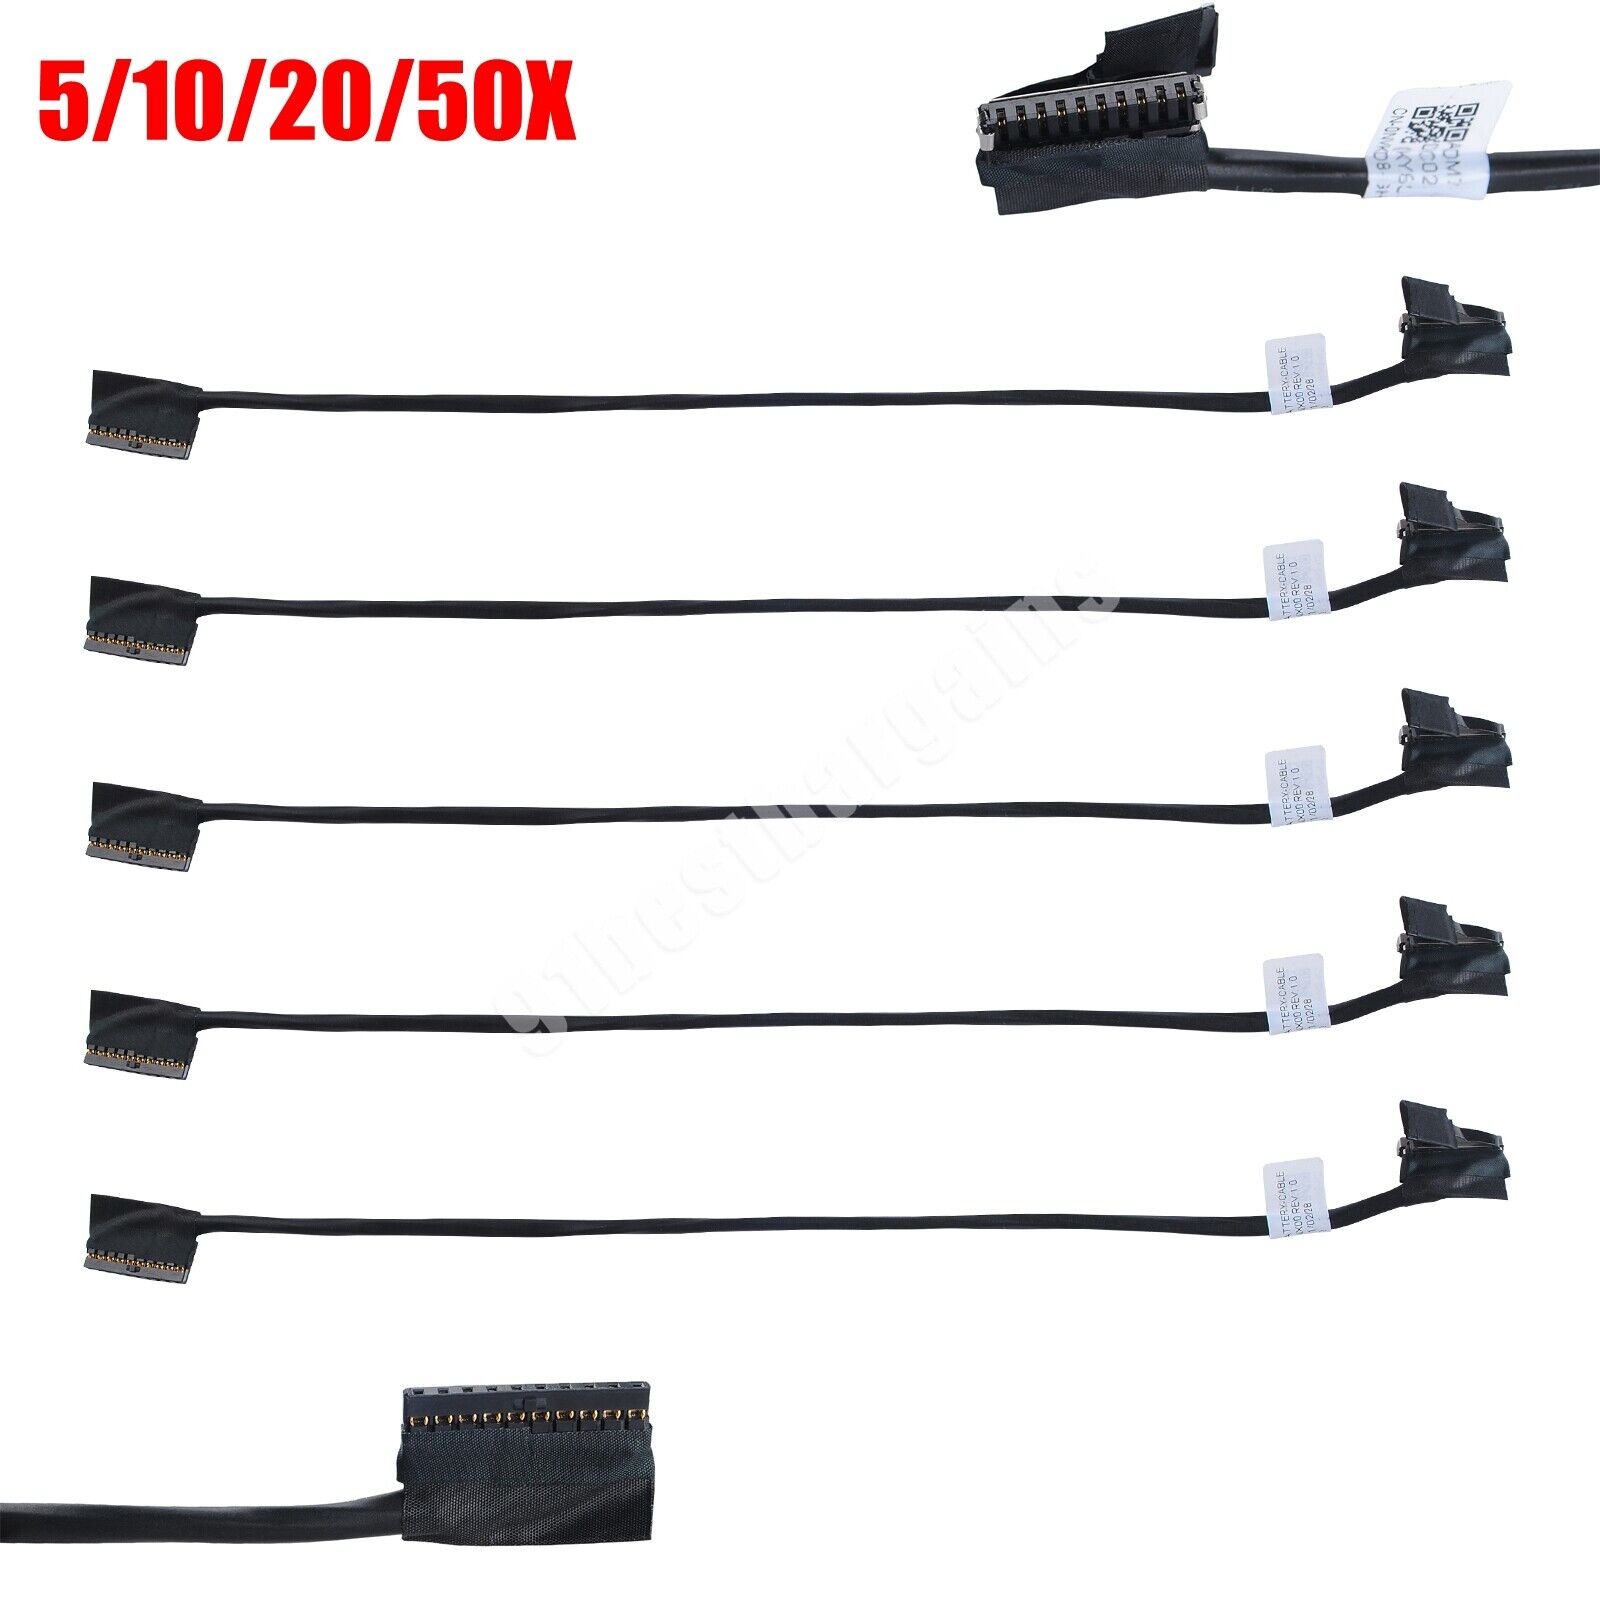 Lot 5/10/20/50X Battery Cable For Dell 5480 E5480 5280 5580 5590 5490 5495 NVKD8